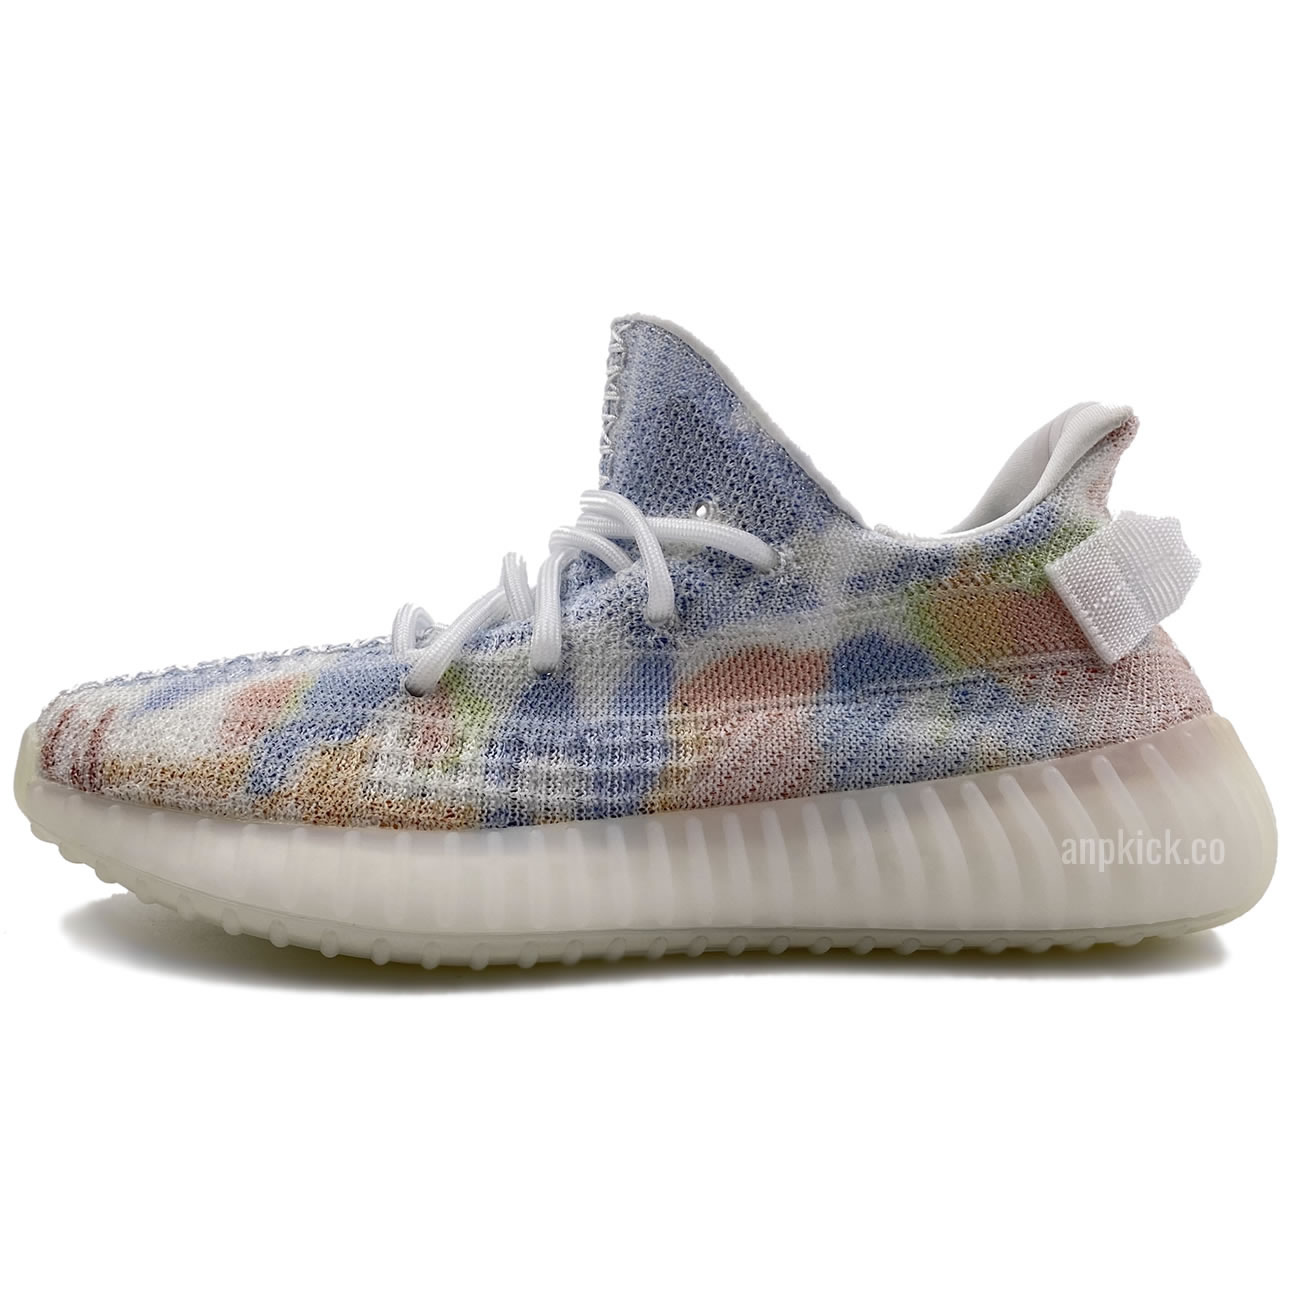 New Custom Yeezy Boost 350 V2 Colorful For Sale (1) - newkick.org